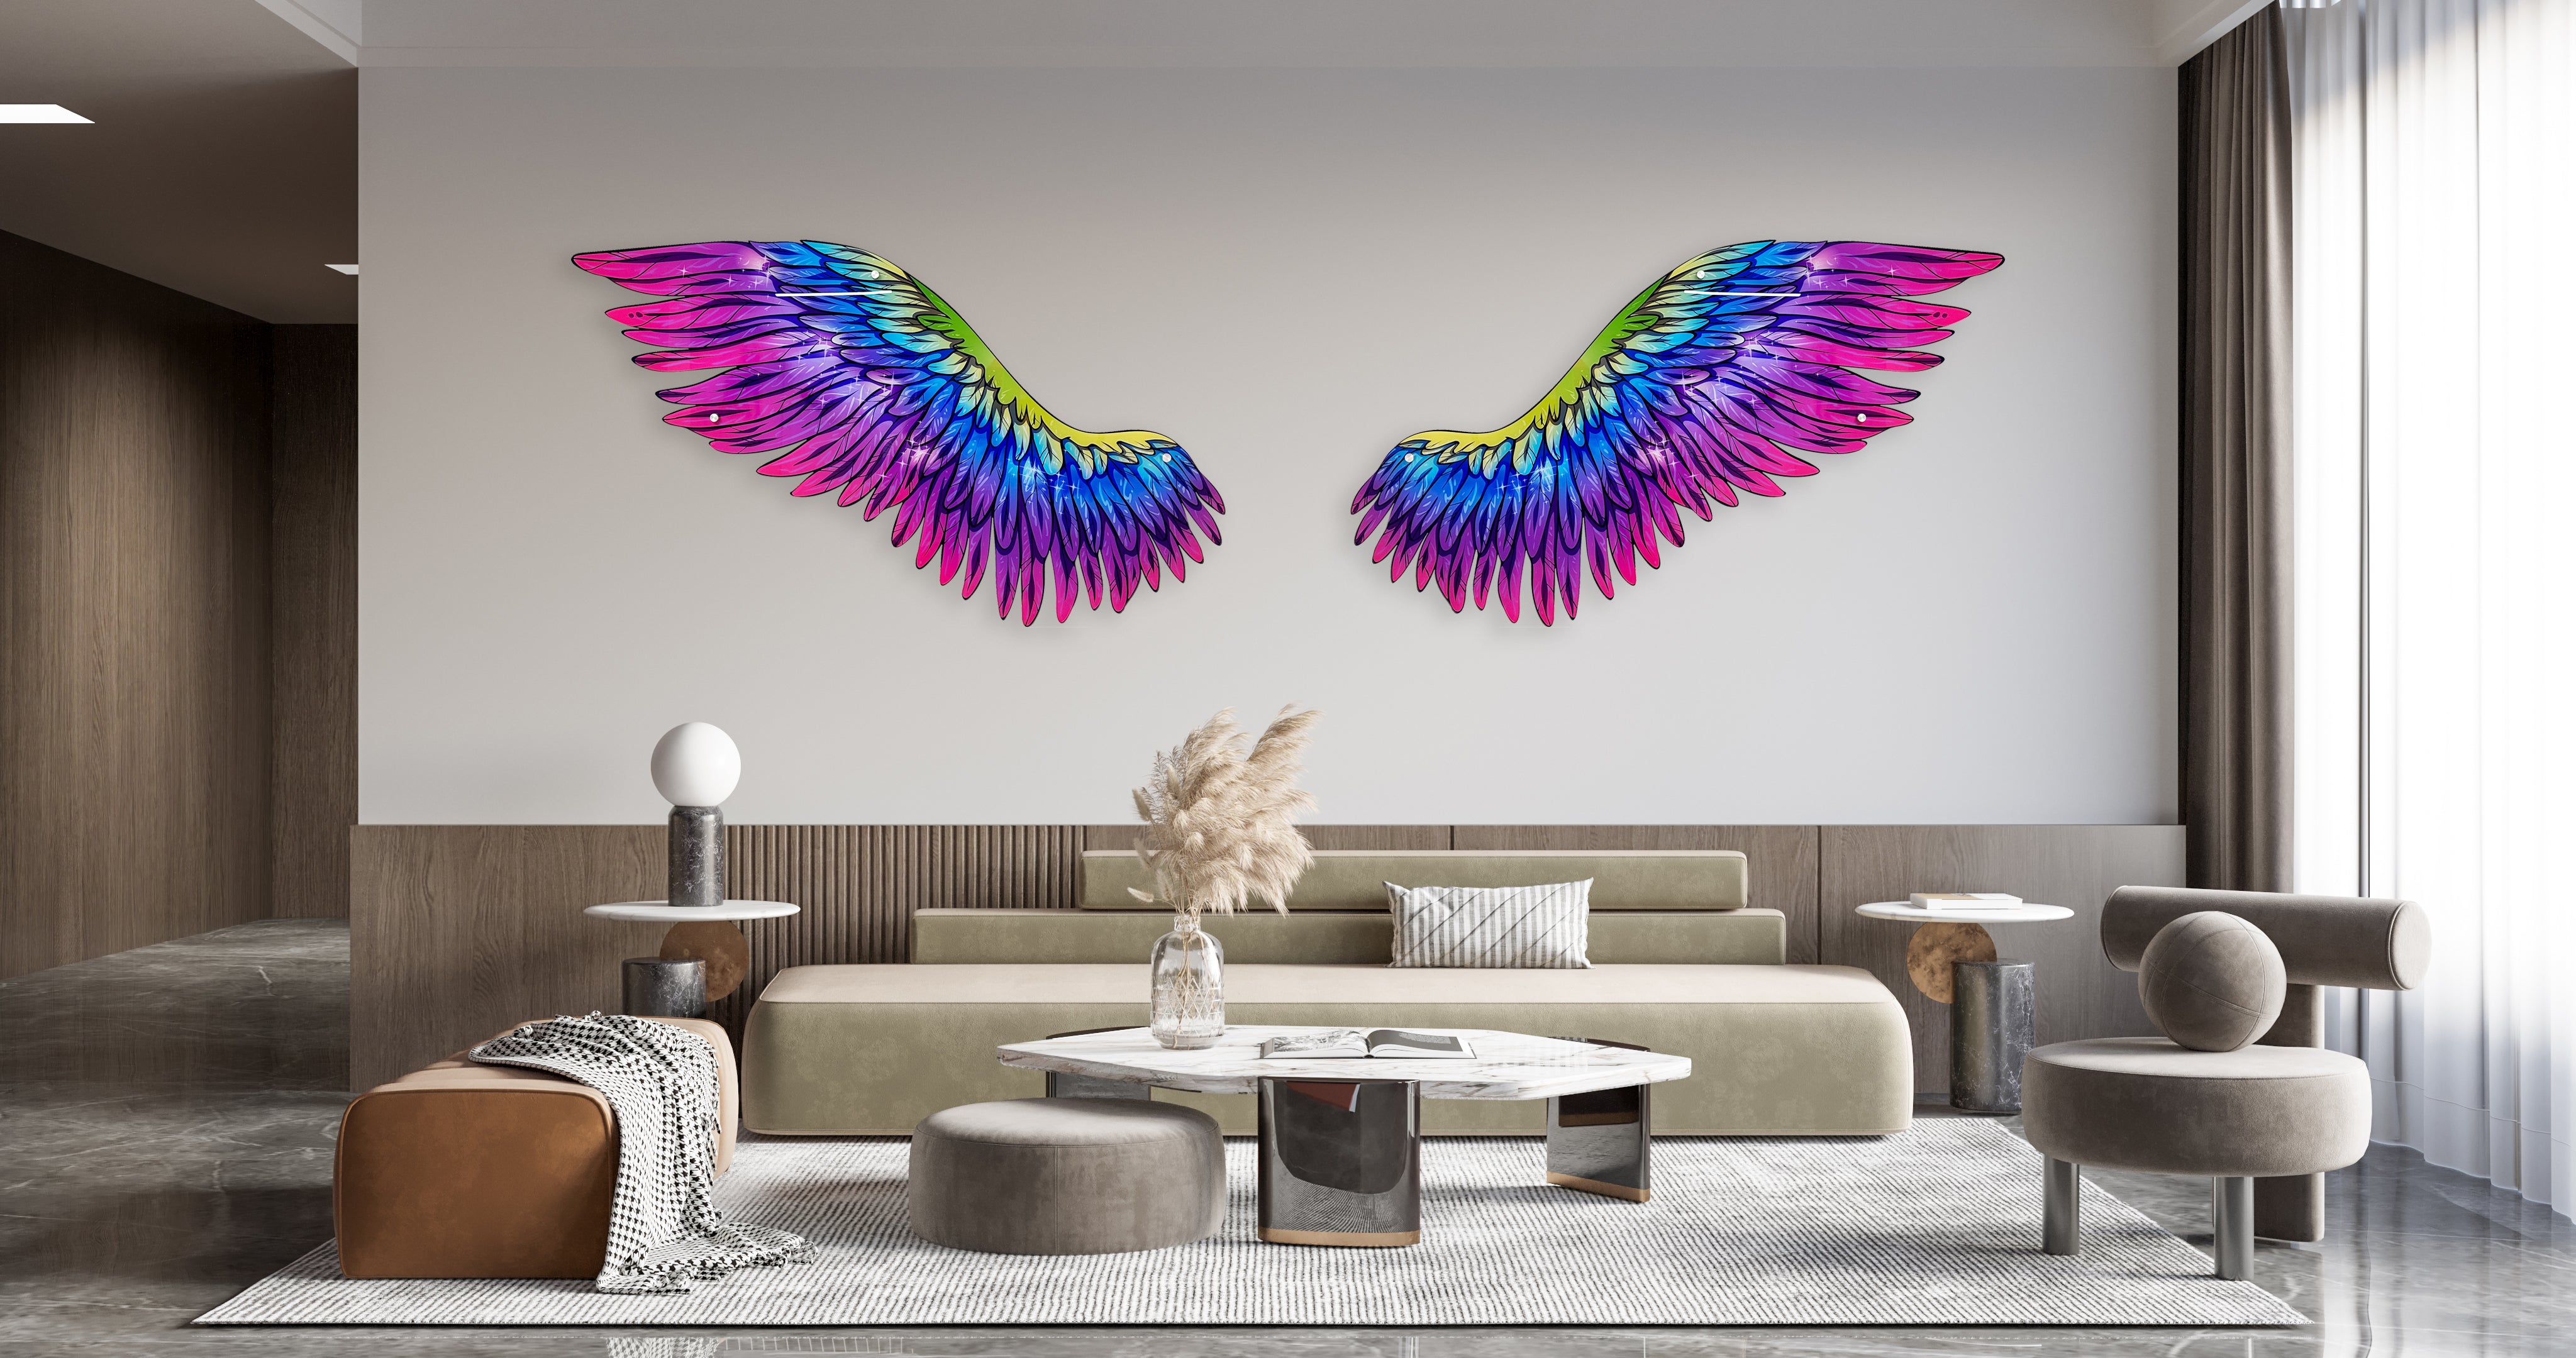 Multicolor Angel Wings / Printed Acrylic Art/ Printed Art / Wall Decor/Wall Sculpture/Abstract Wall Decor/ Gift buy at the best price with delivery – uniqstiq